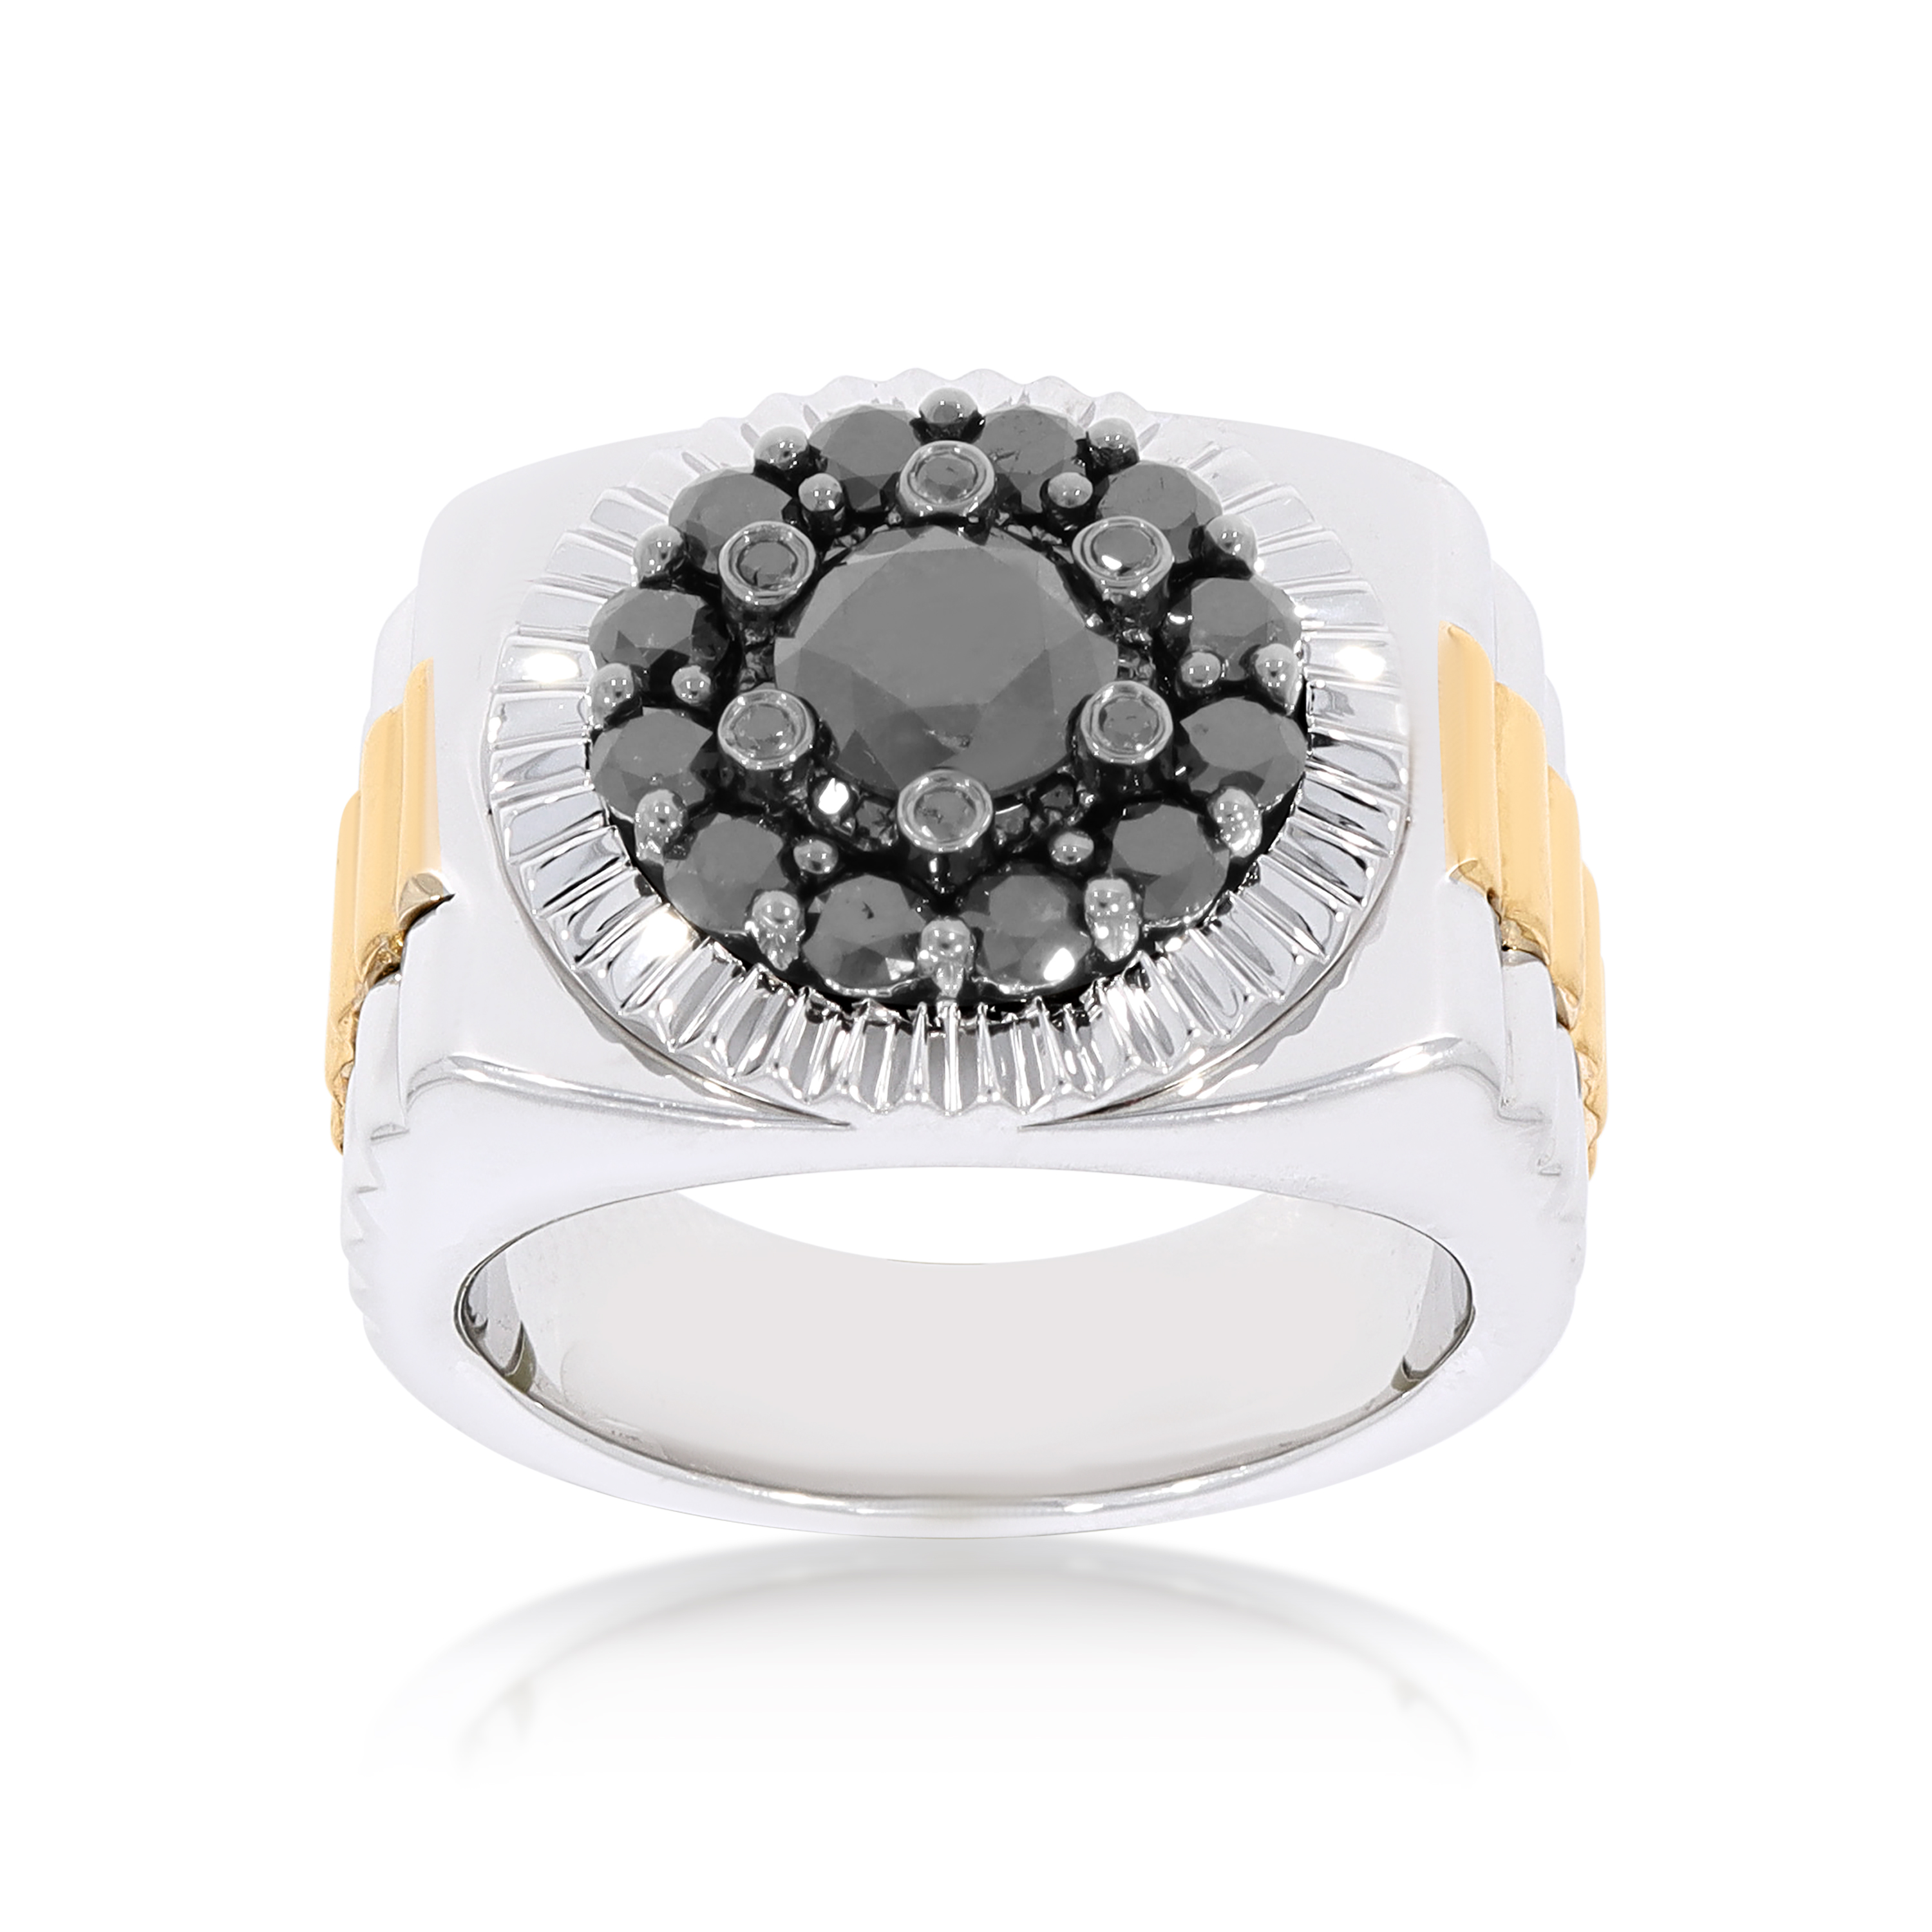 Black Diamond Ring 2.89 ct. 10K White Gold With Yellow sides